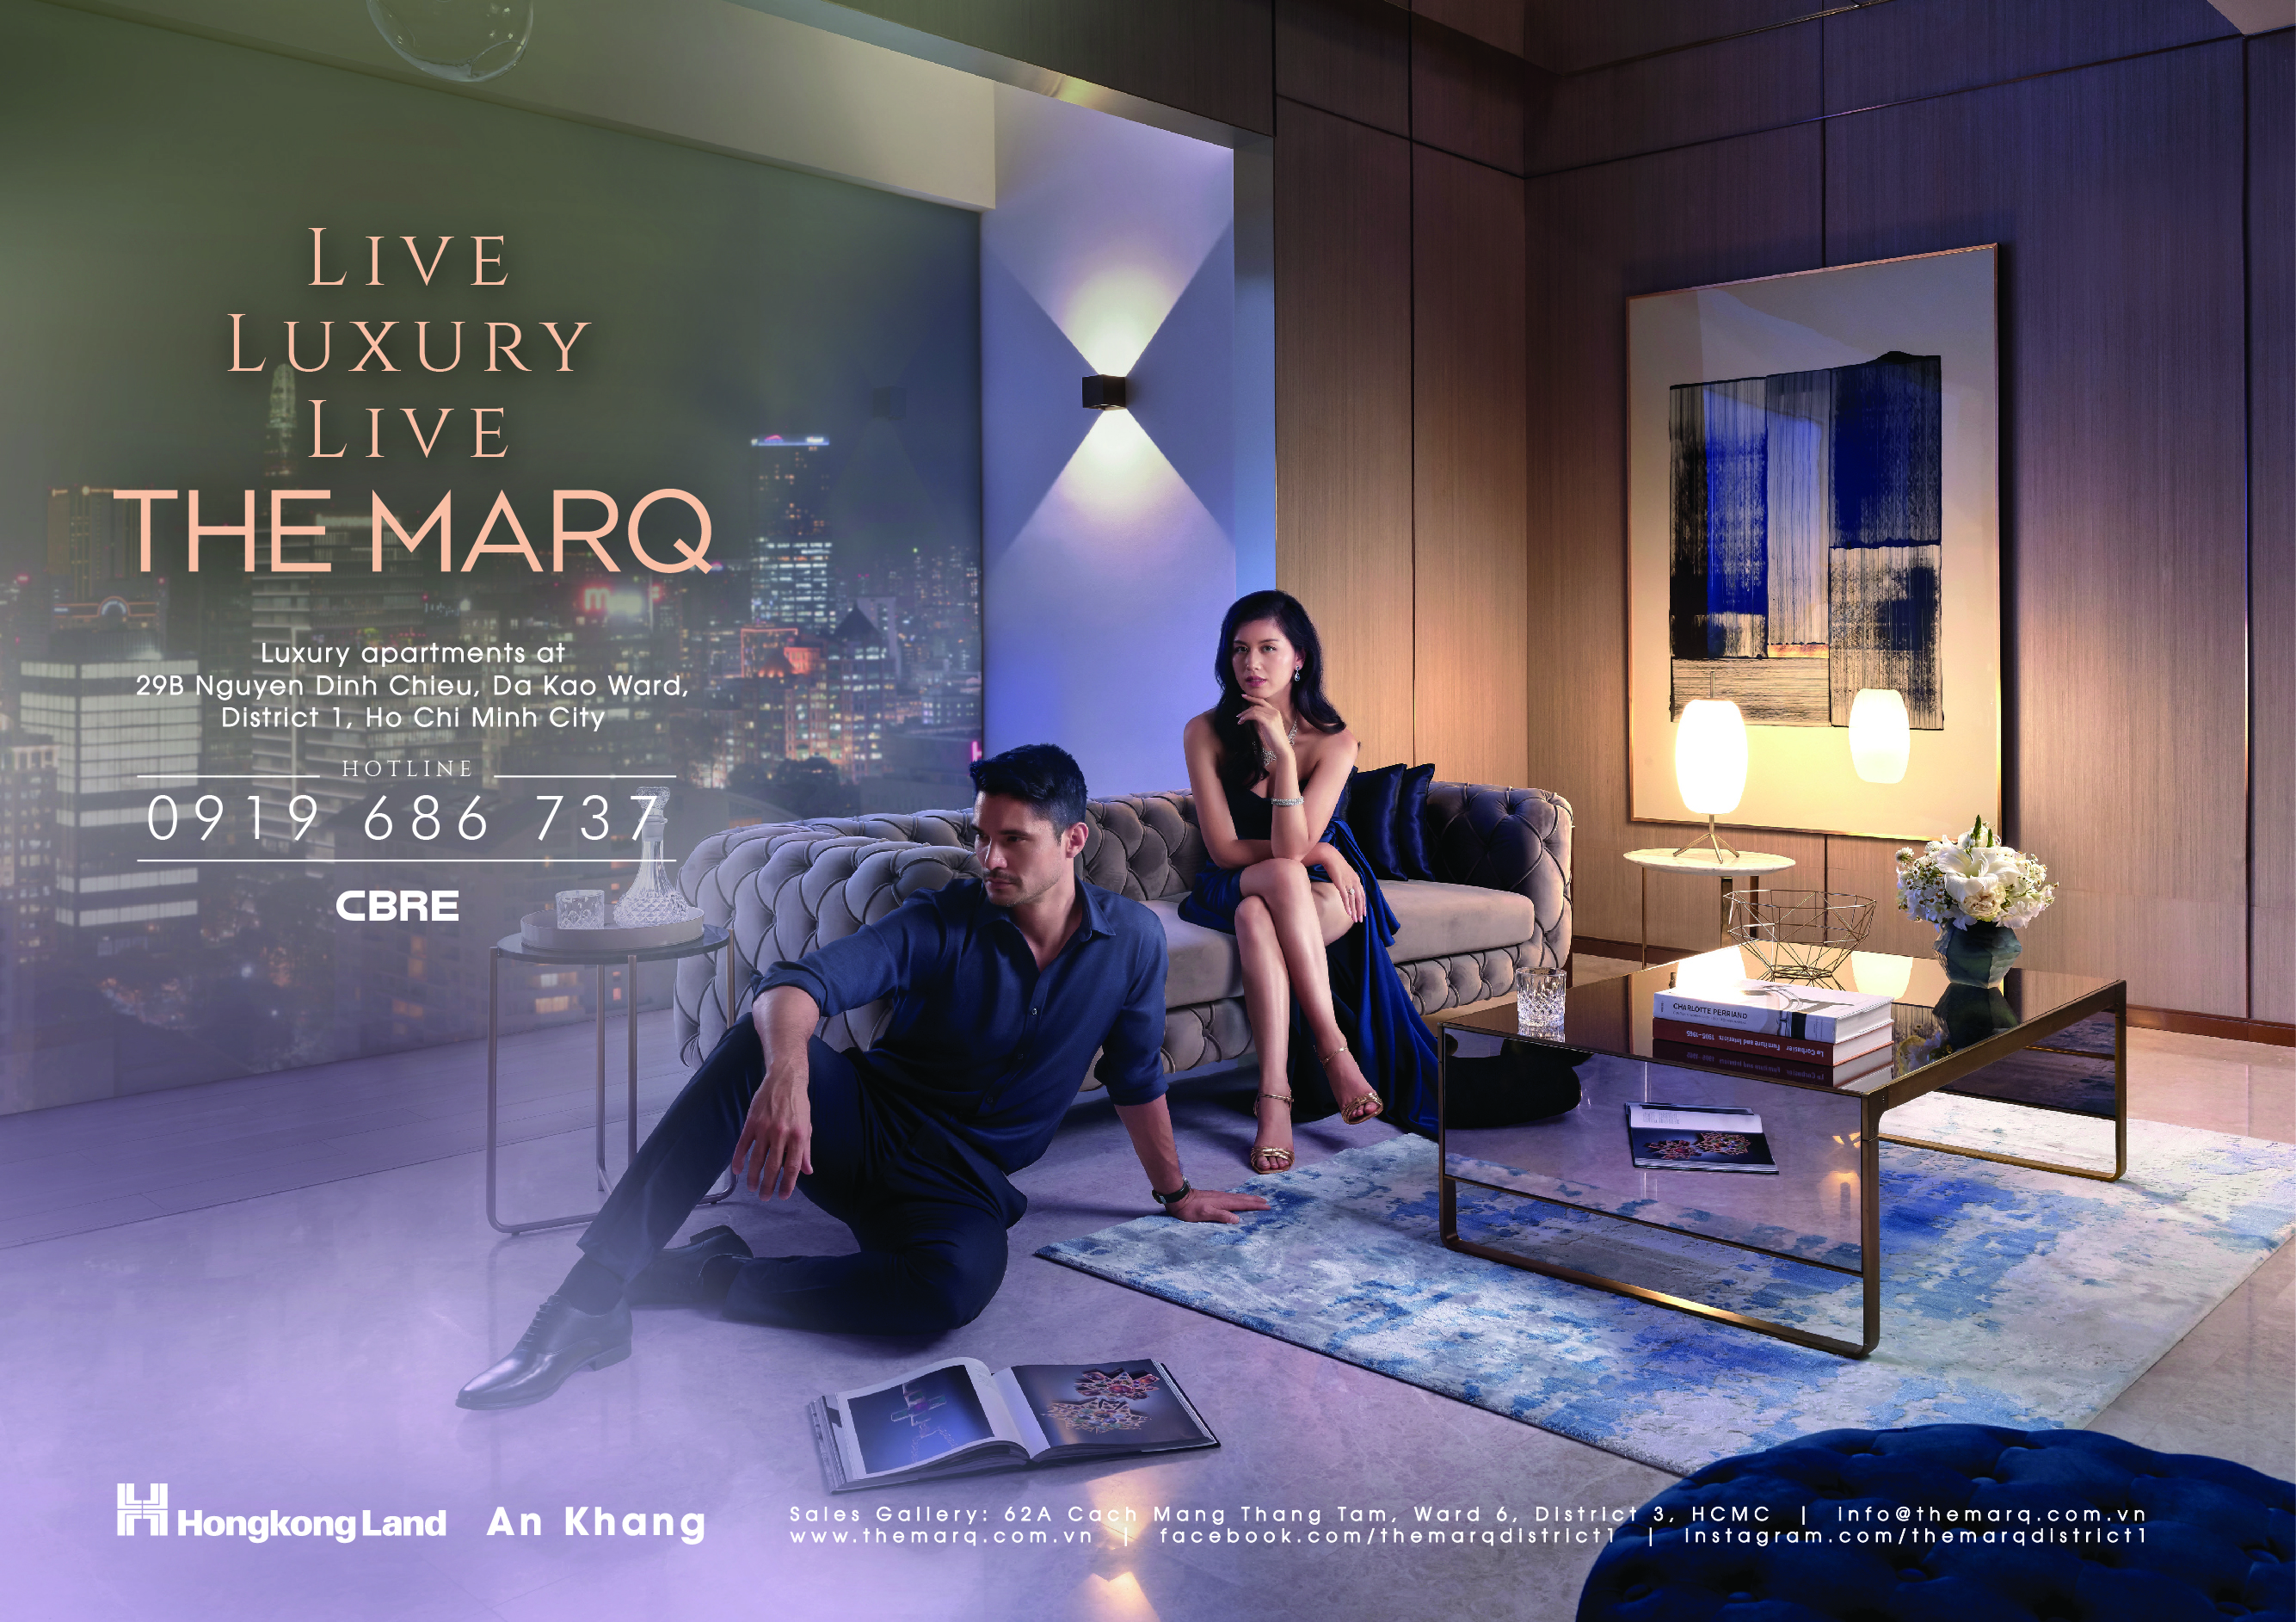 The Marq - a true architectural masterpiece by a team of the excellence